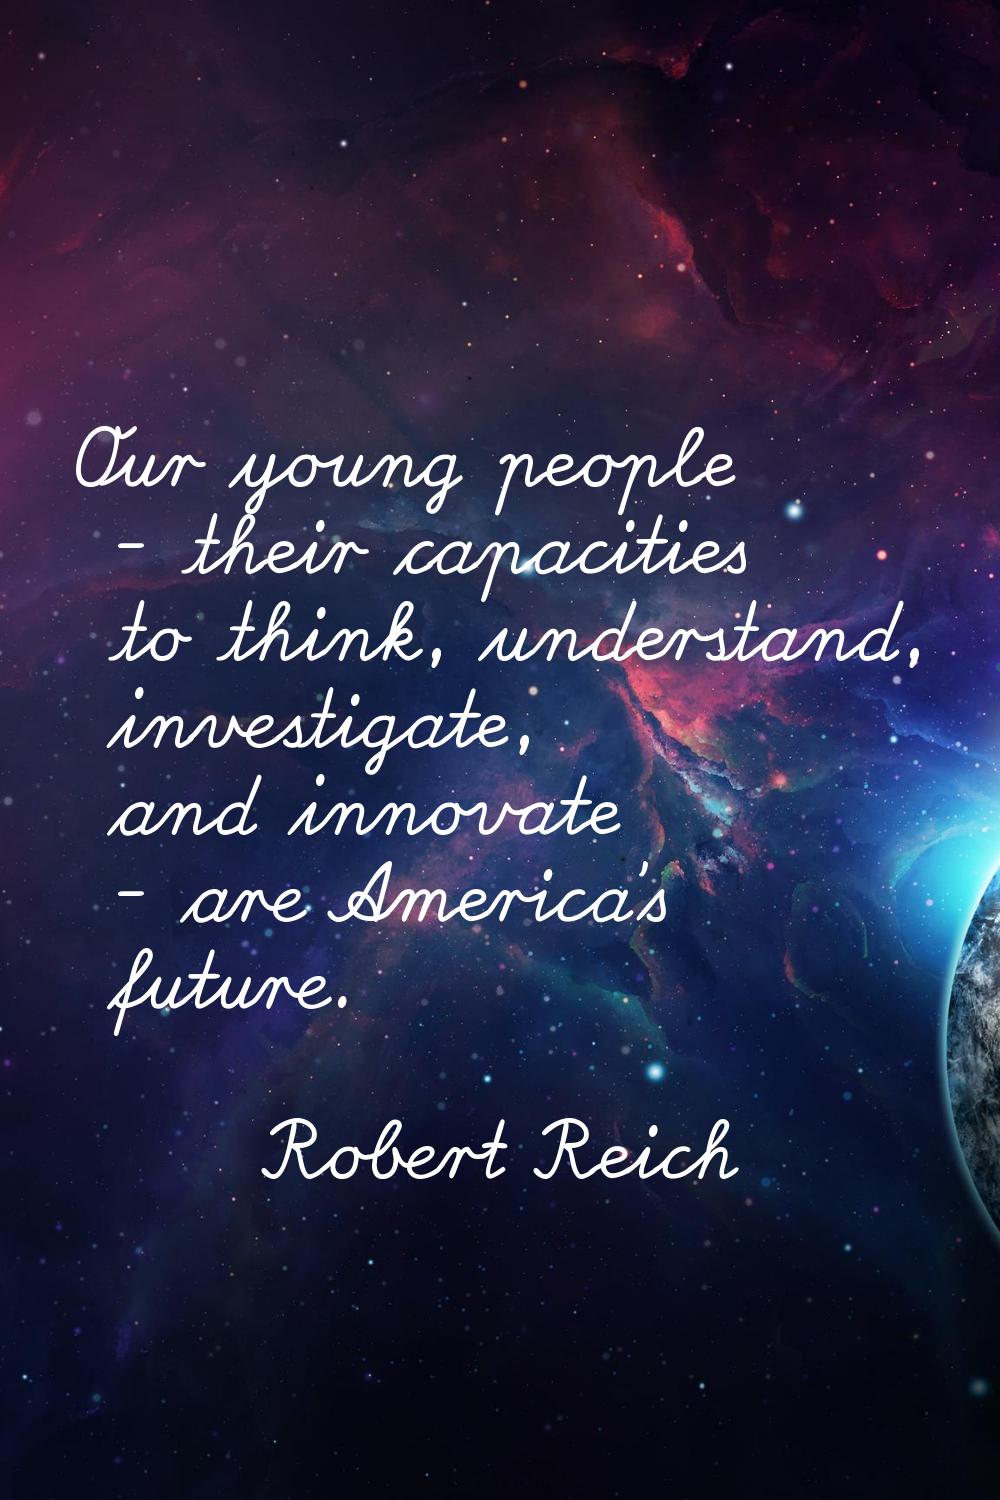 Our young people - their capacities to think, understand, investigate, and innovate - are America's